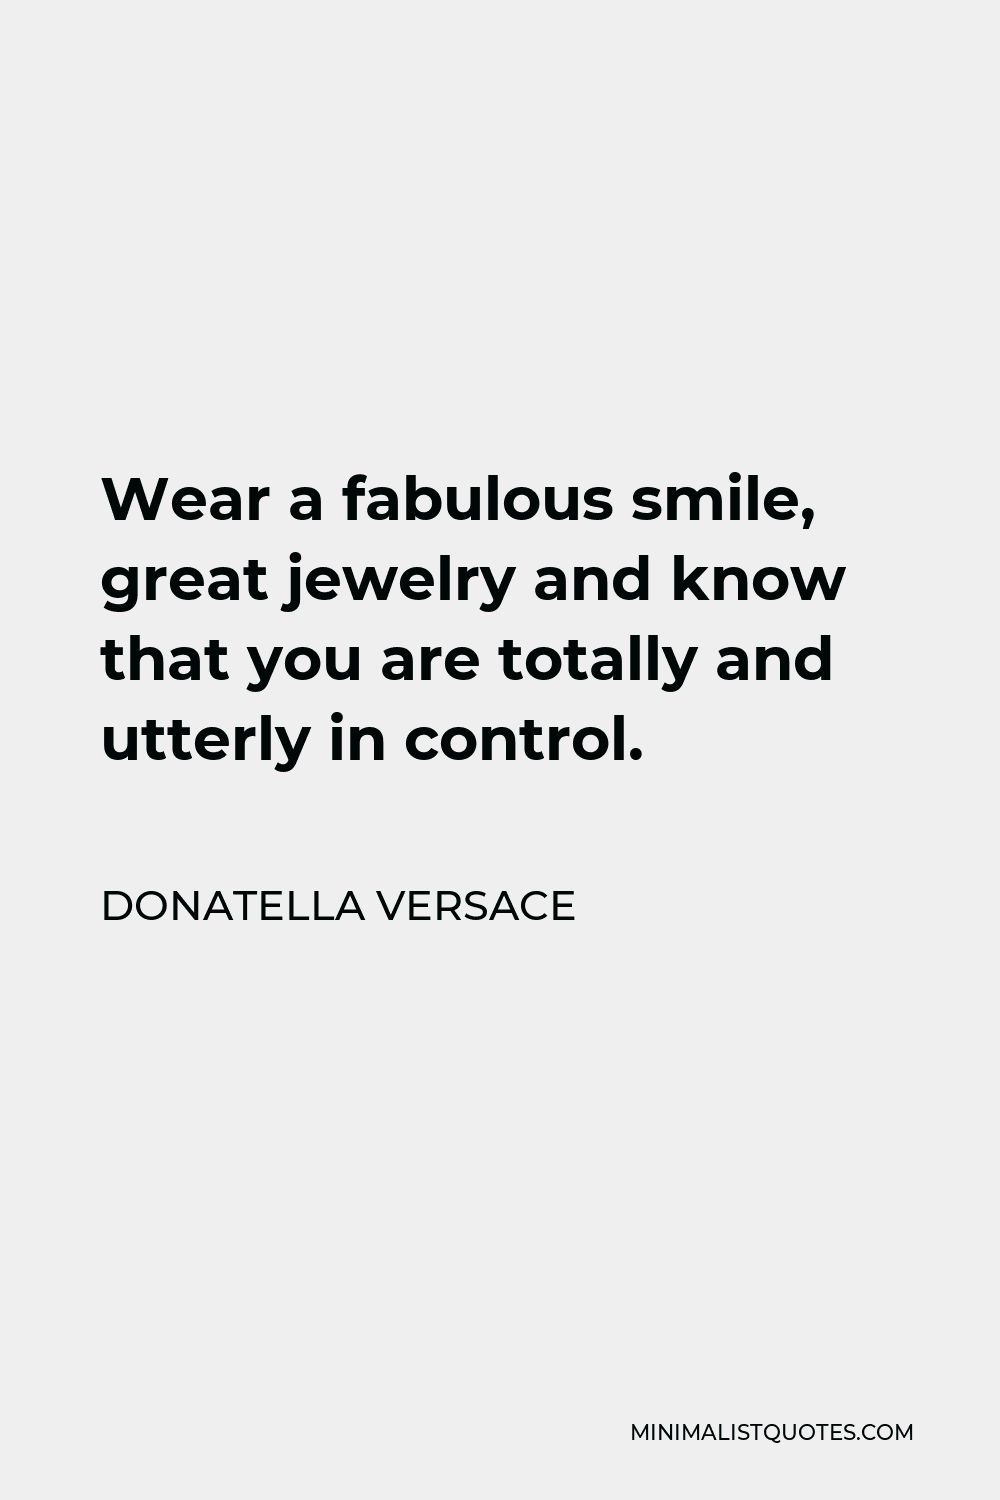 Wear a fabulous smile, great jewelry and know that you are totally and  utterly in control.” - Donatella Versace 💙🤍🧡 #jewelry…